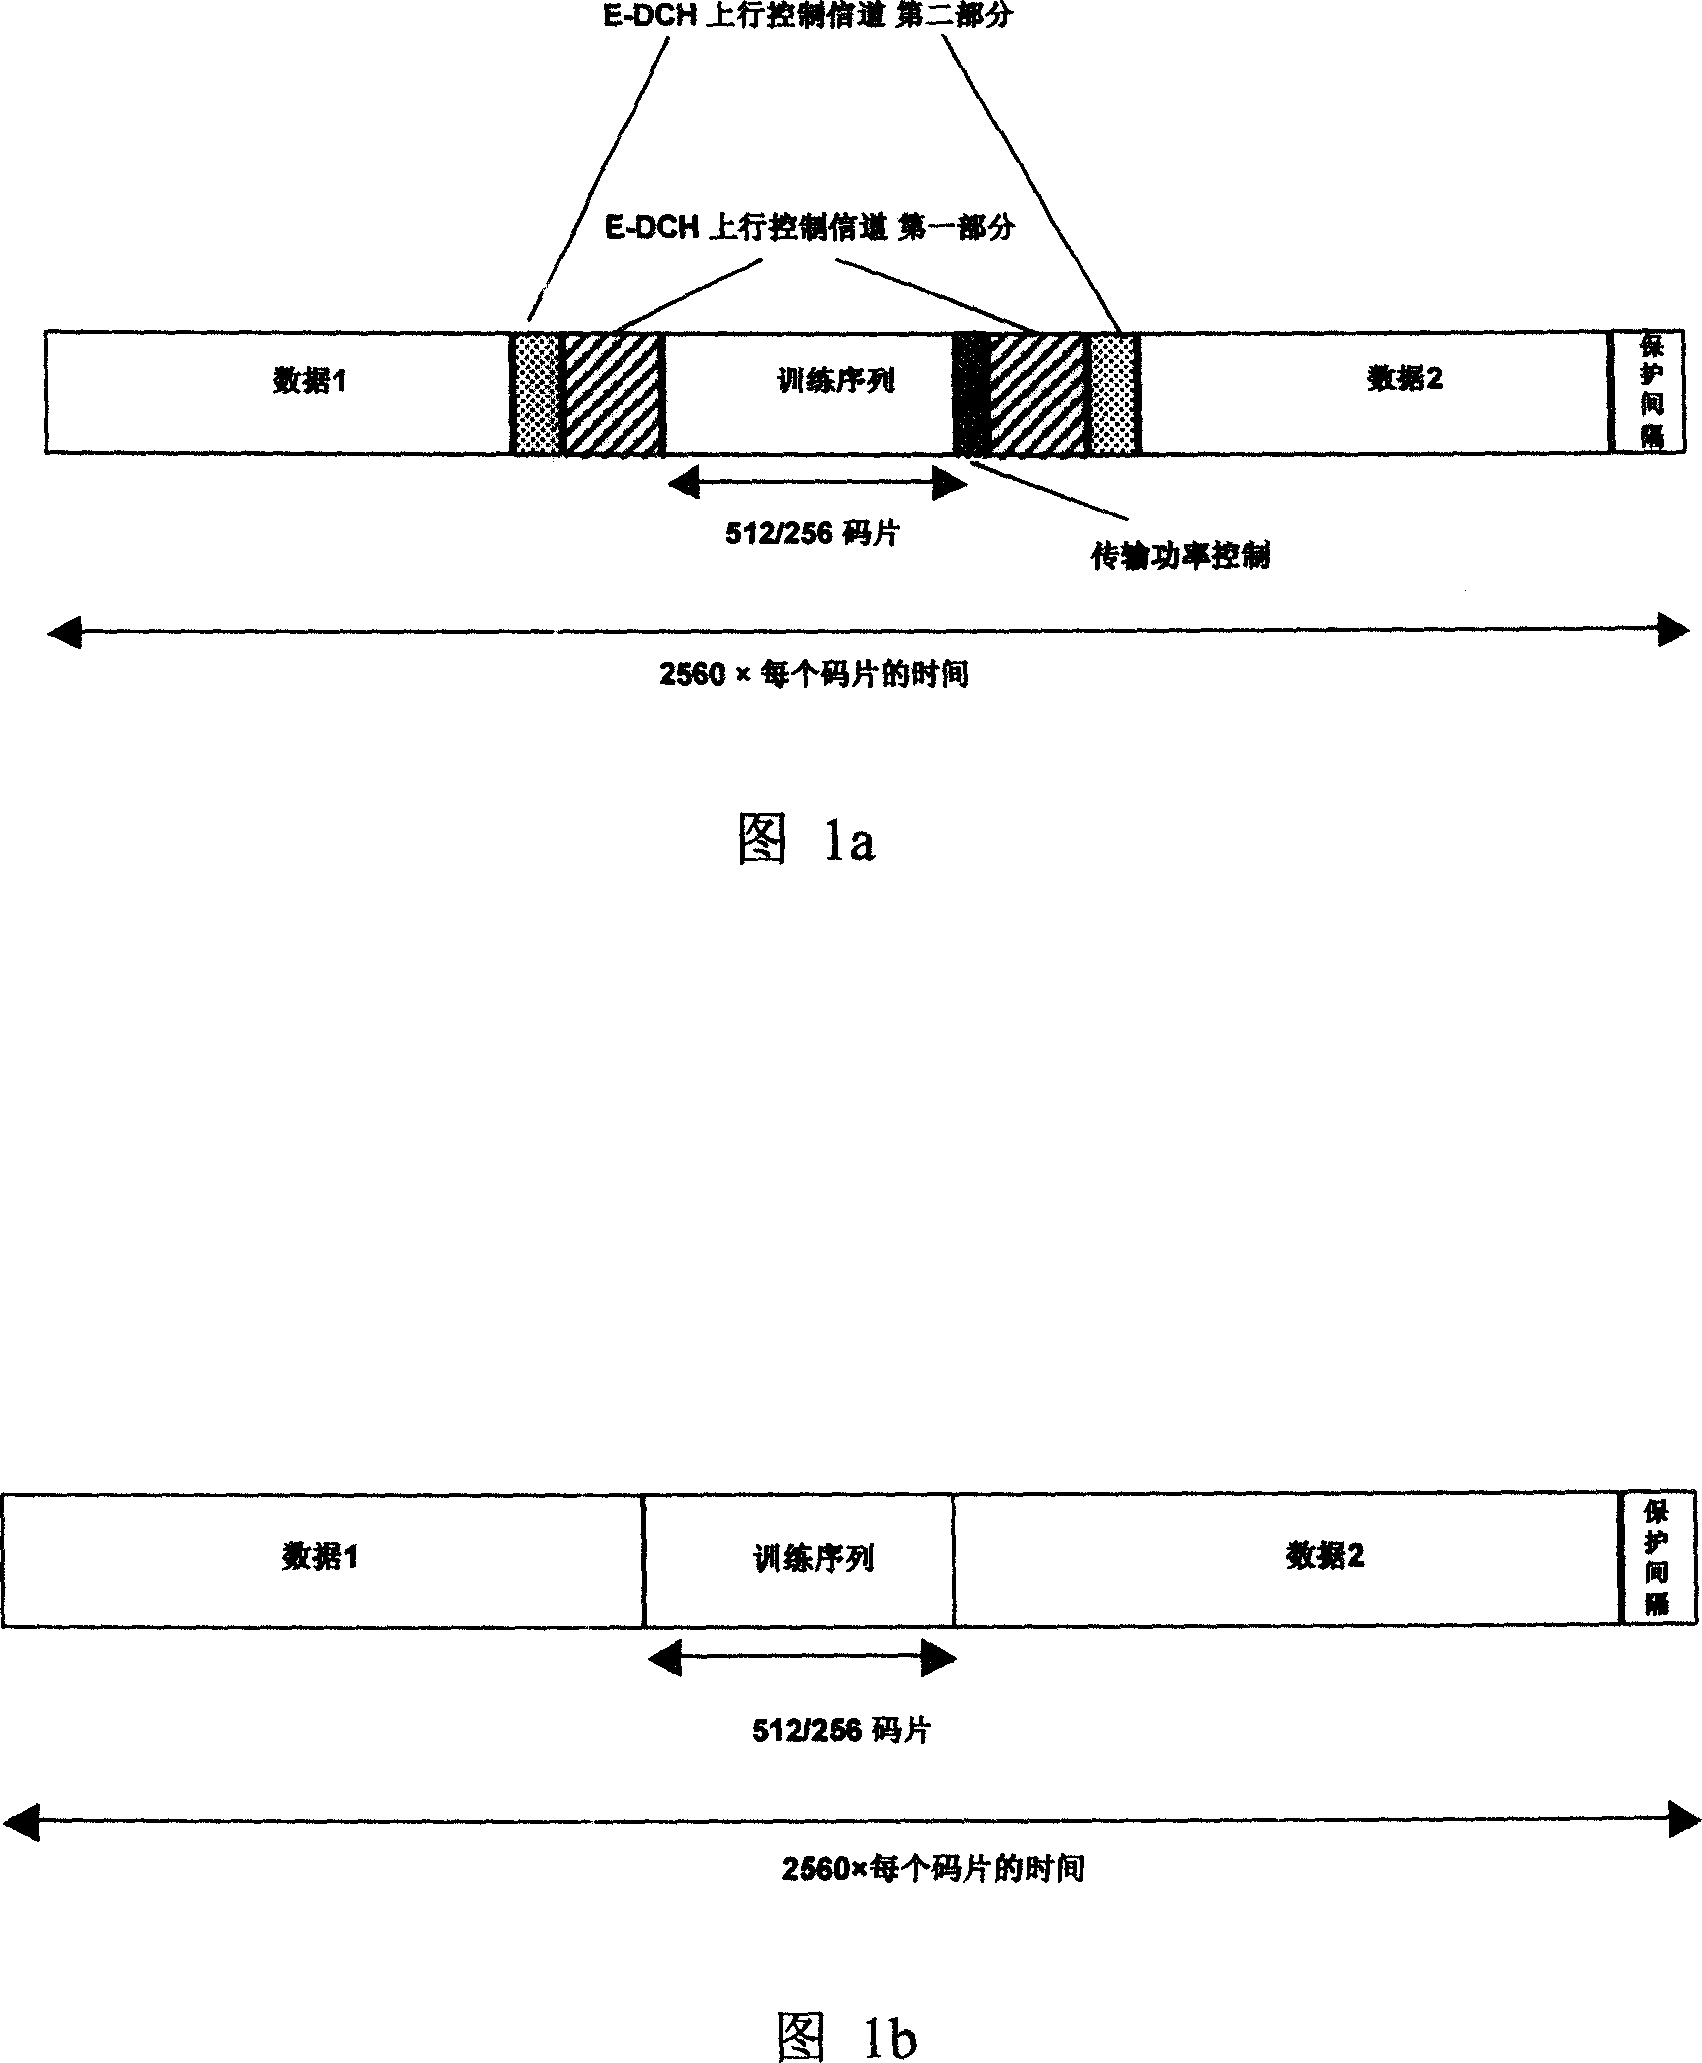 Code track resource allocation method for time division code division multiple access system high-speed ascending grouping access